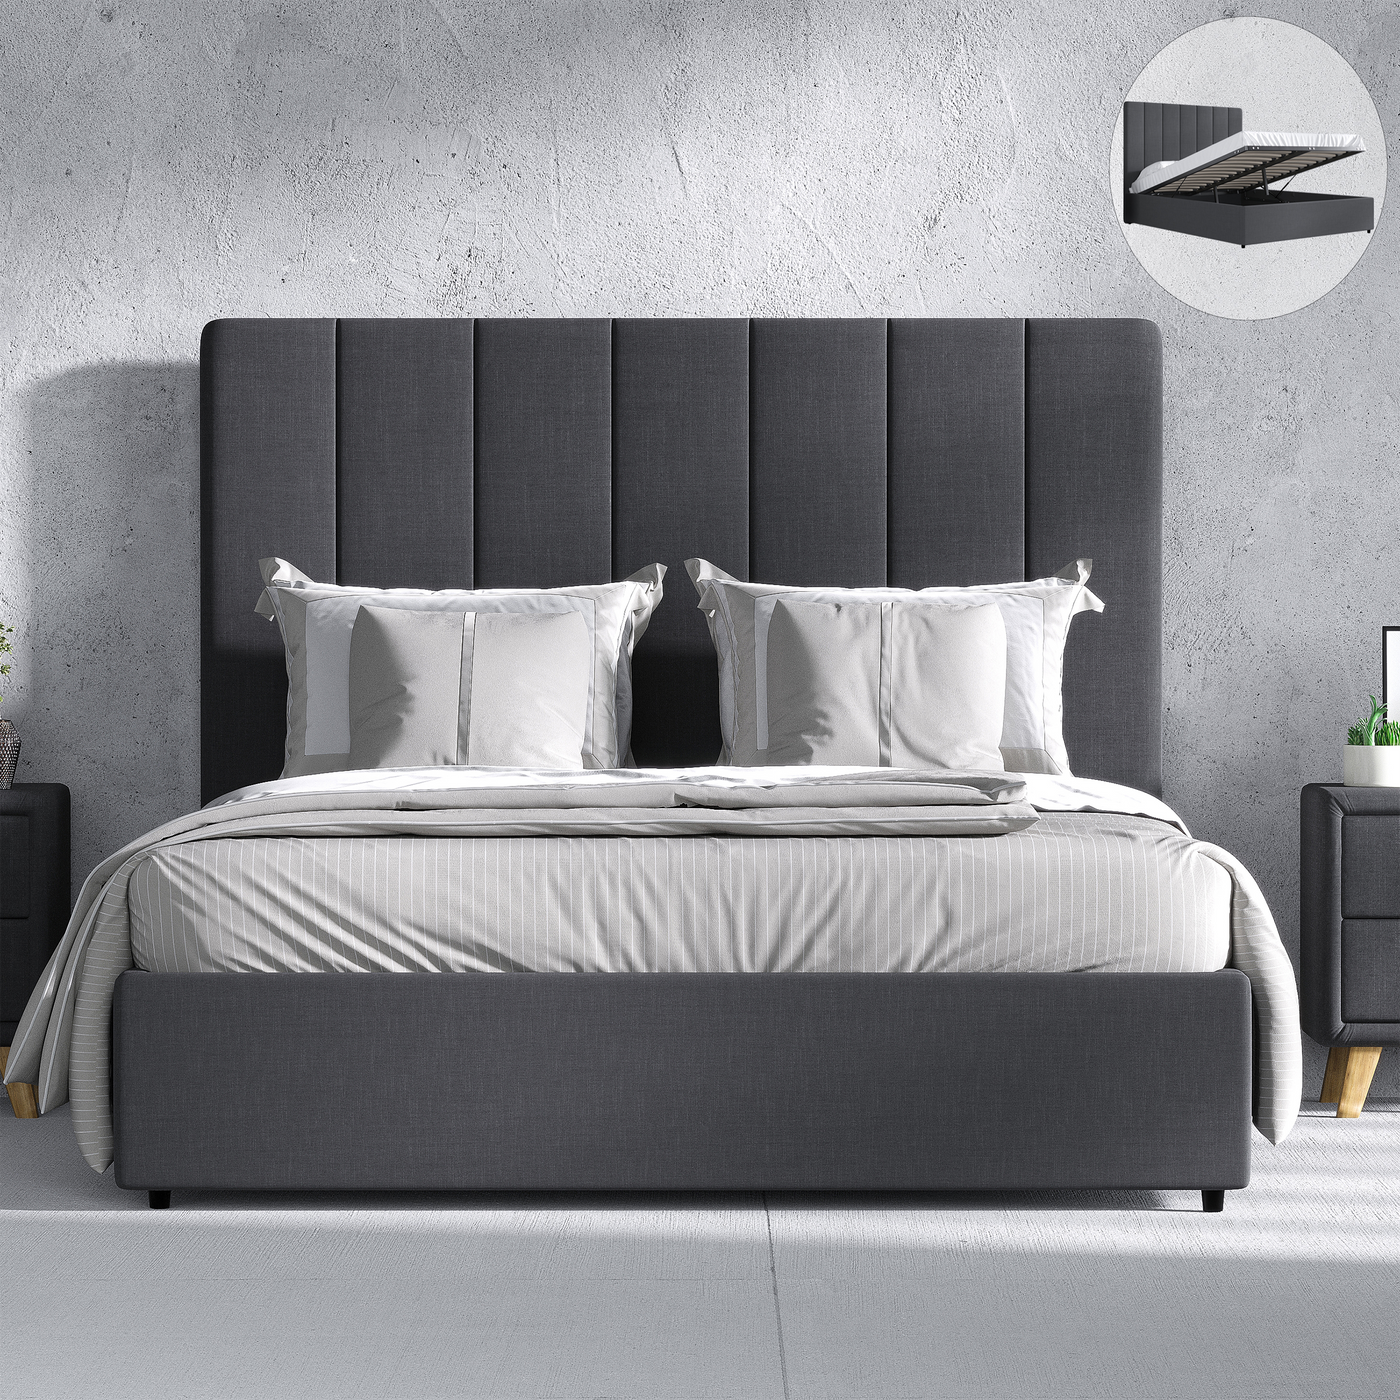 Madrid Gas Lift Storage Bed Frame (Charcoal Linen Fabric) and Windsor Latex Pocket Spring Mattress Combo Deal (7758248378622)